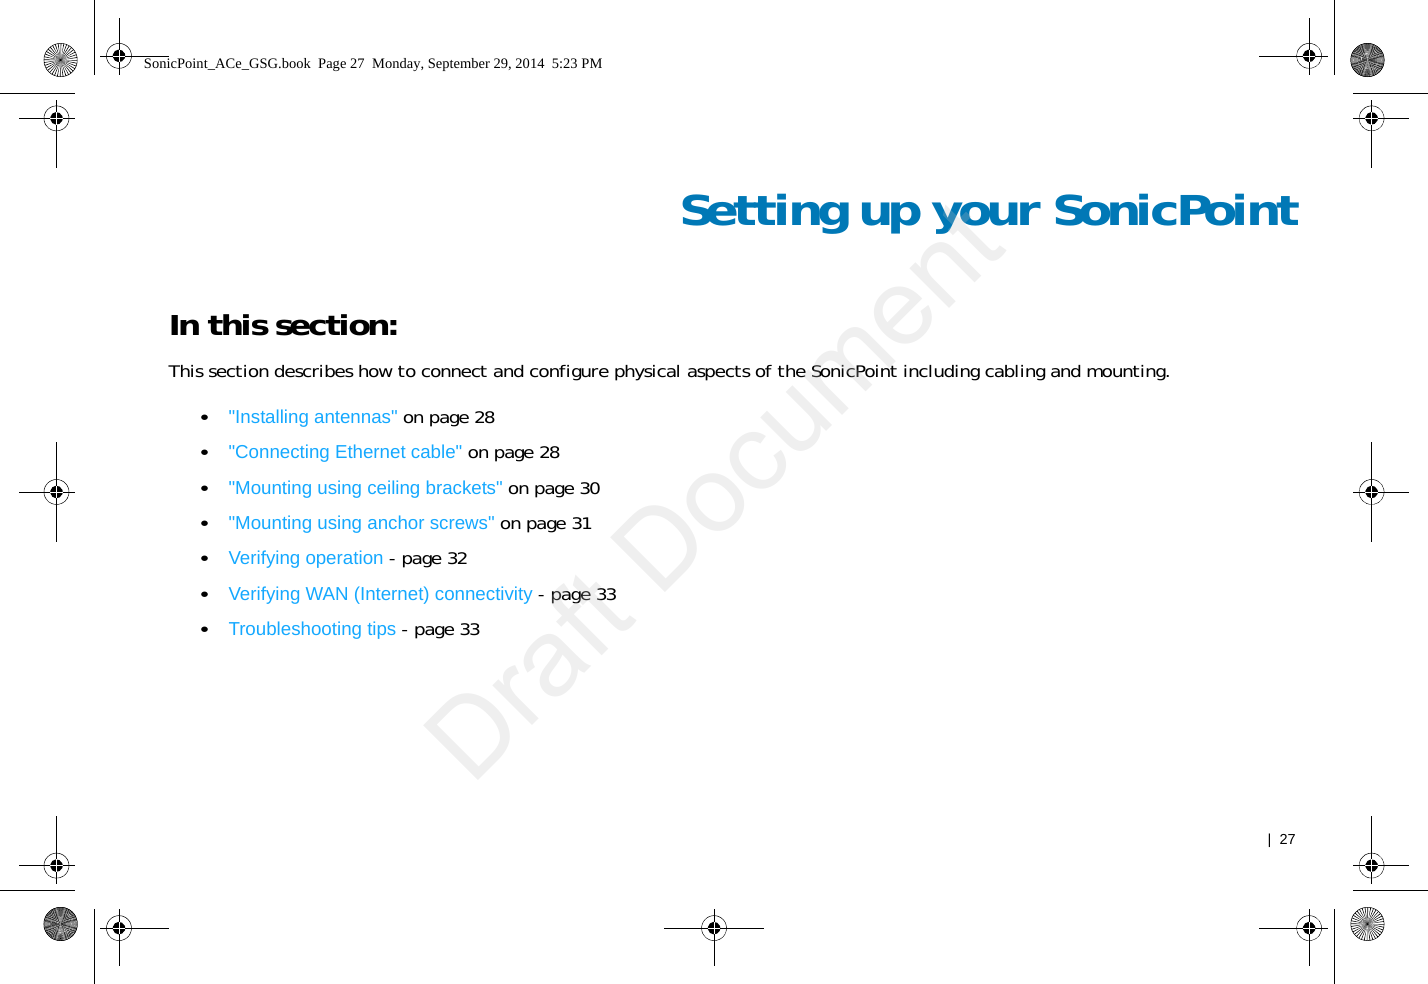   |  27Setting up your SonicPointIn this section:This section describes how to connect and configure physical aspects of the SonicPoint including cabling and mounting.•&quot;Installing antennas&quot; on page 28•&quot;Connecting Ethernet cable&quot; on page 28•&quot;Mounting using ceiling brackets&quot; on page 30•&quot;Mounting using anchor screws&quot; on page 31•Verifying operation - page 32•Verifying WAN (Internet) connectivity - page 33•Troubleshooting tips - page 33SonicPoint_ACe_GSG.book  Page 27  Monday, September 29, 2014  5:23 PMDraft Document